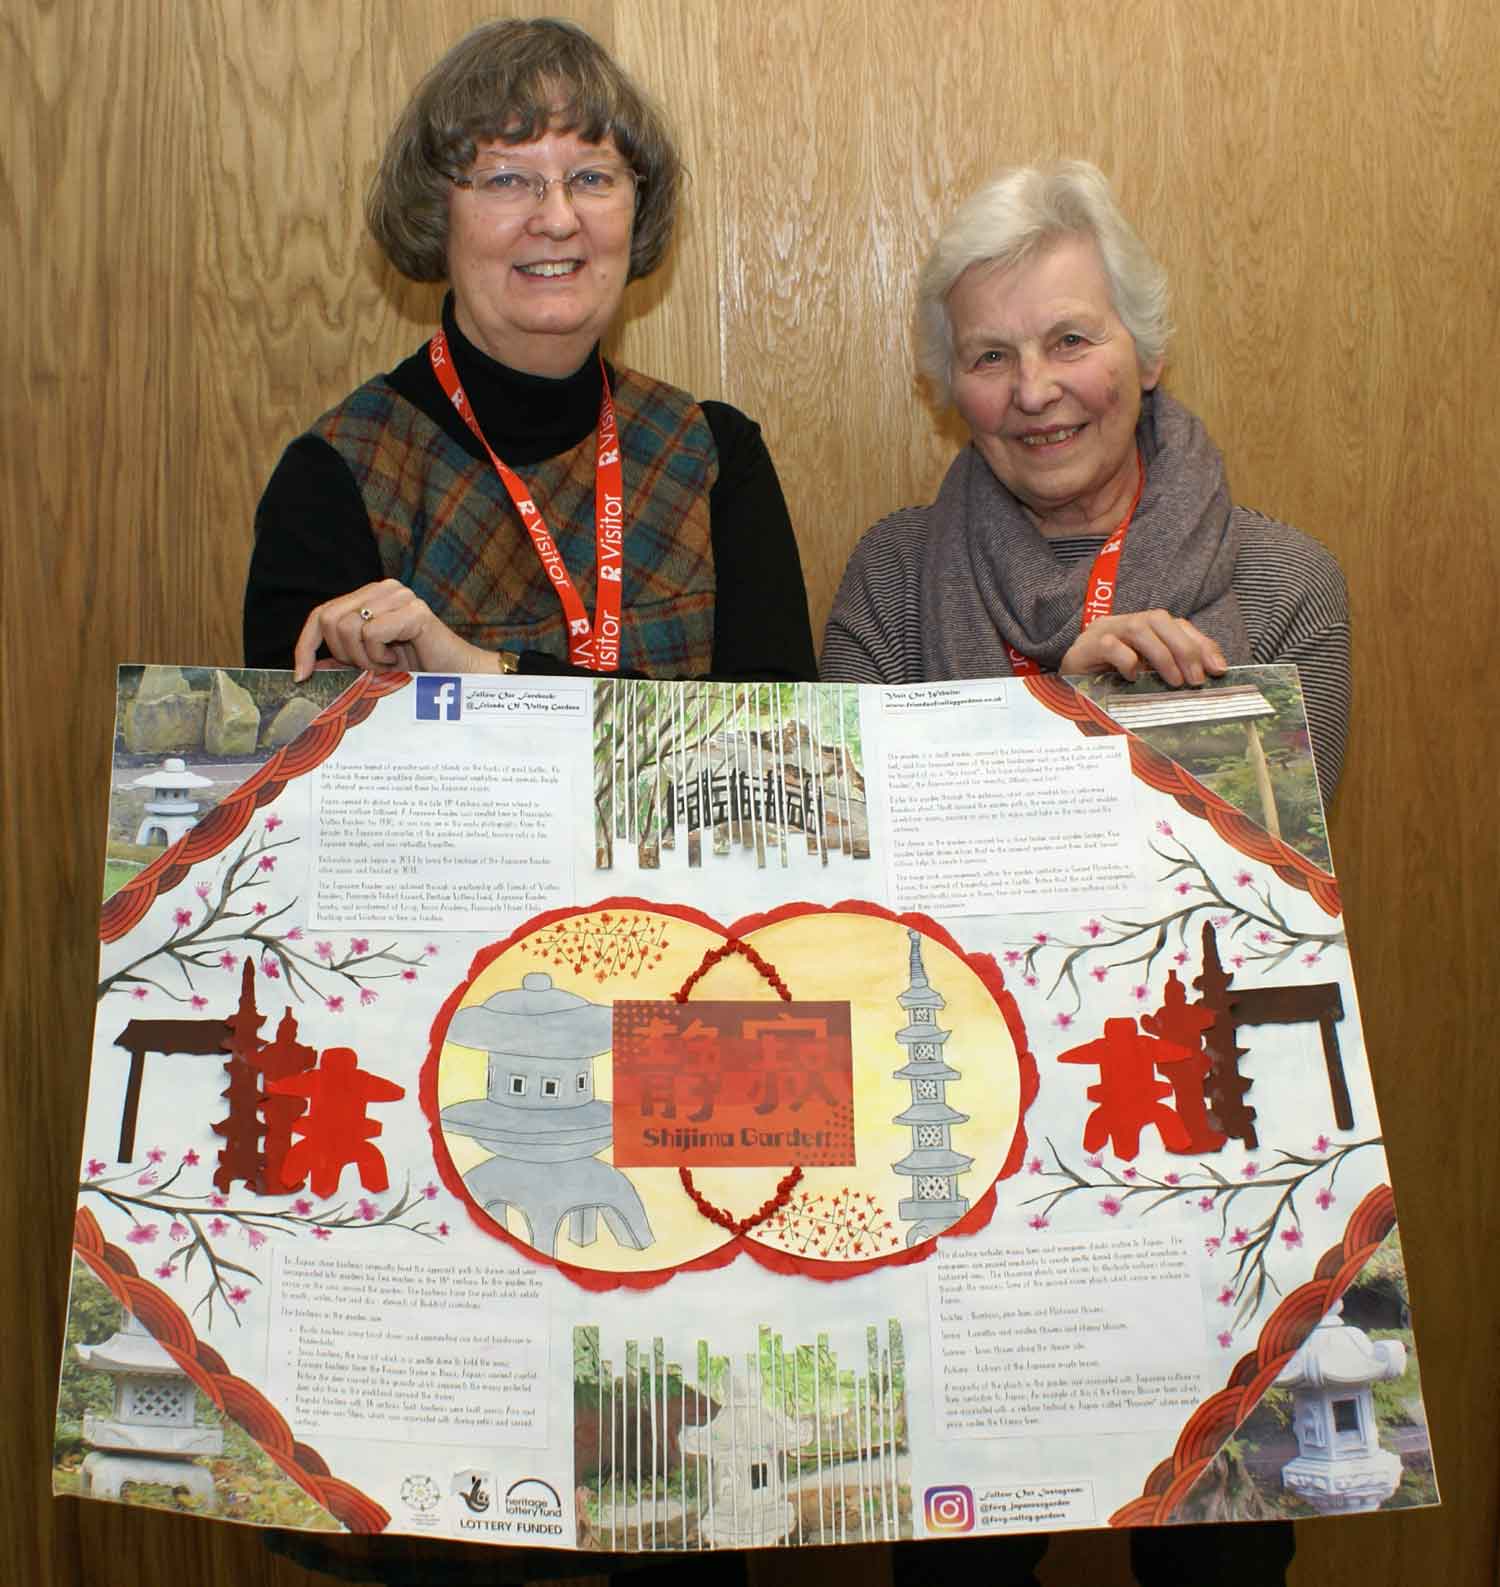 Ann Beeby and Liz Childow, from Friends of Valley Gardens, were impressed with the quality of the work produced by Rossett School students as part of the design competition